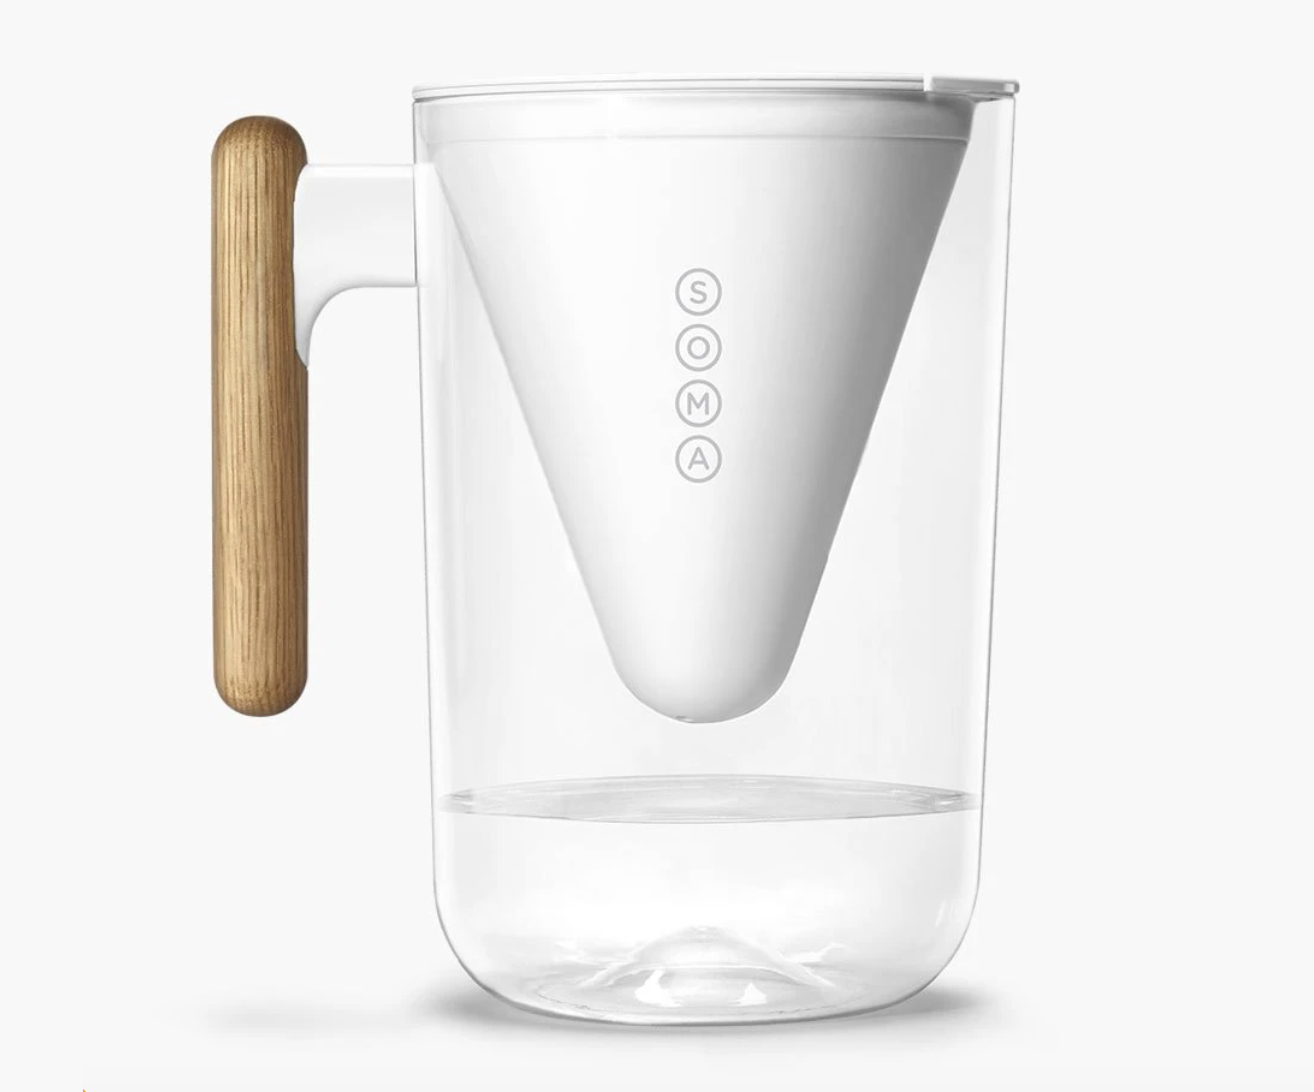 Soma-Filtered-Water-Pitcher